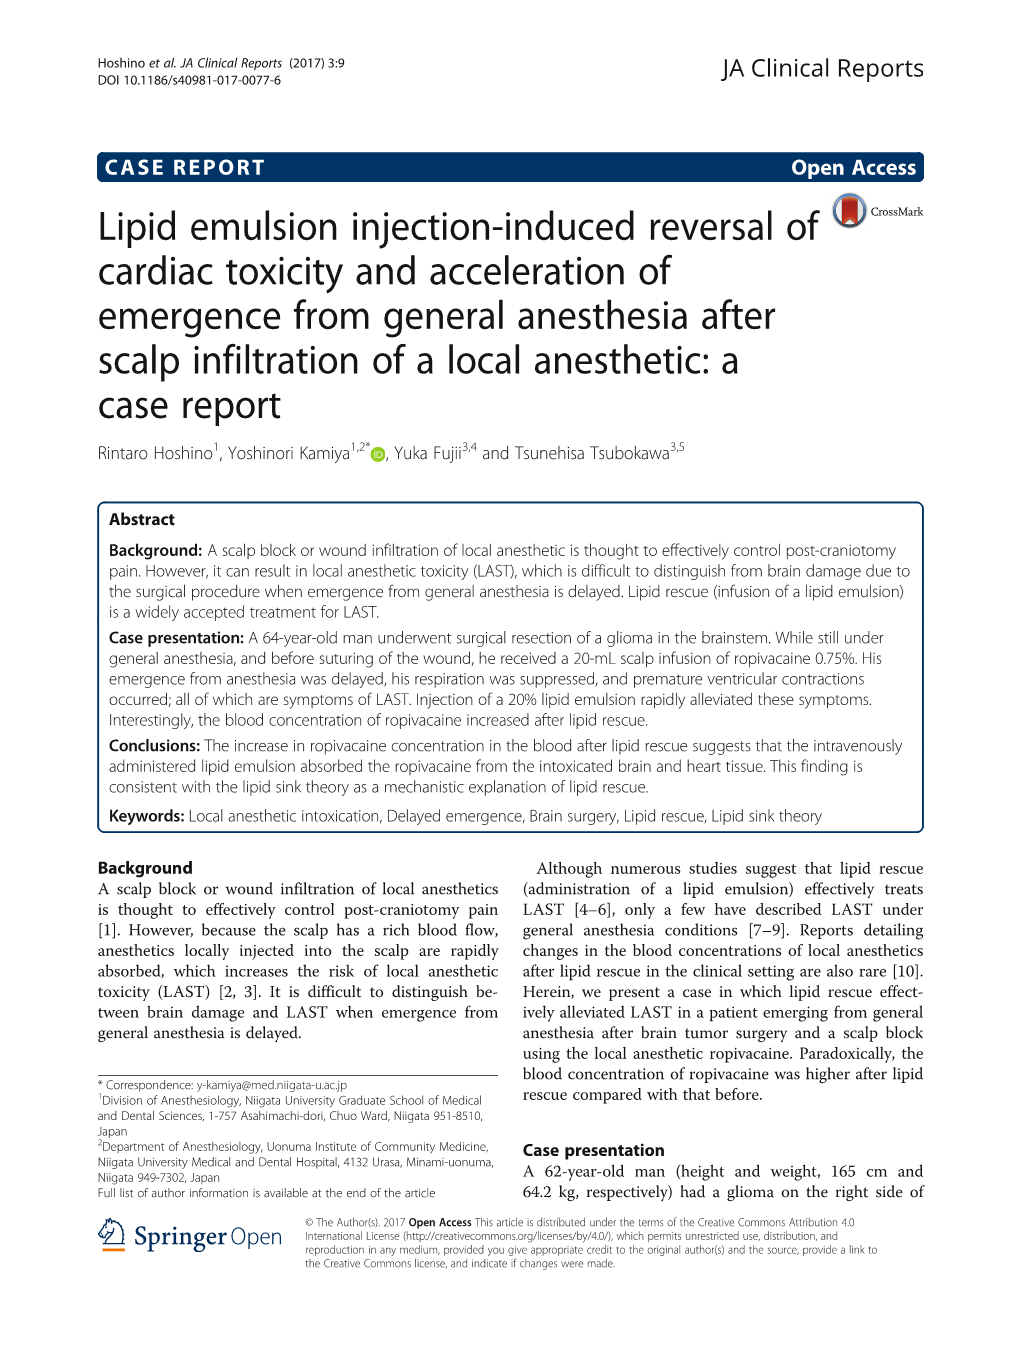 Lipid Emulsion Injection-Induced Reversal of Cardiac Toxicity and Acceleration of Emergence from General Anesthesia After Scalp